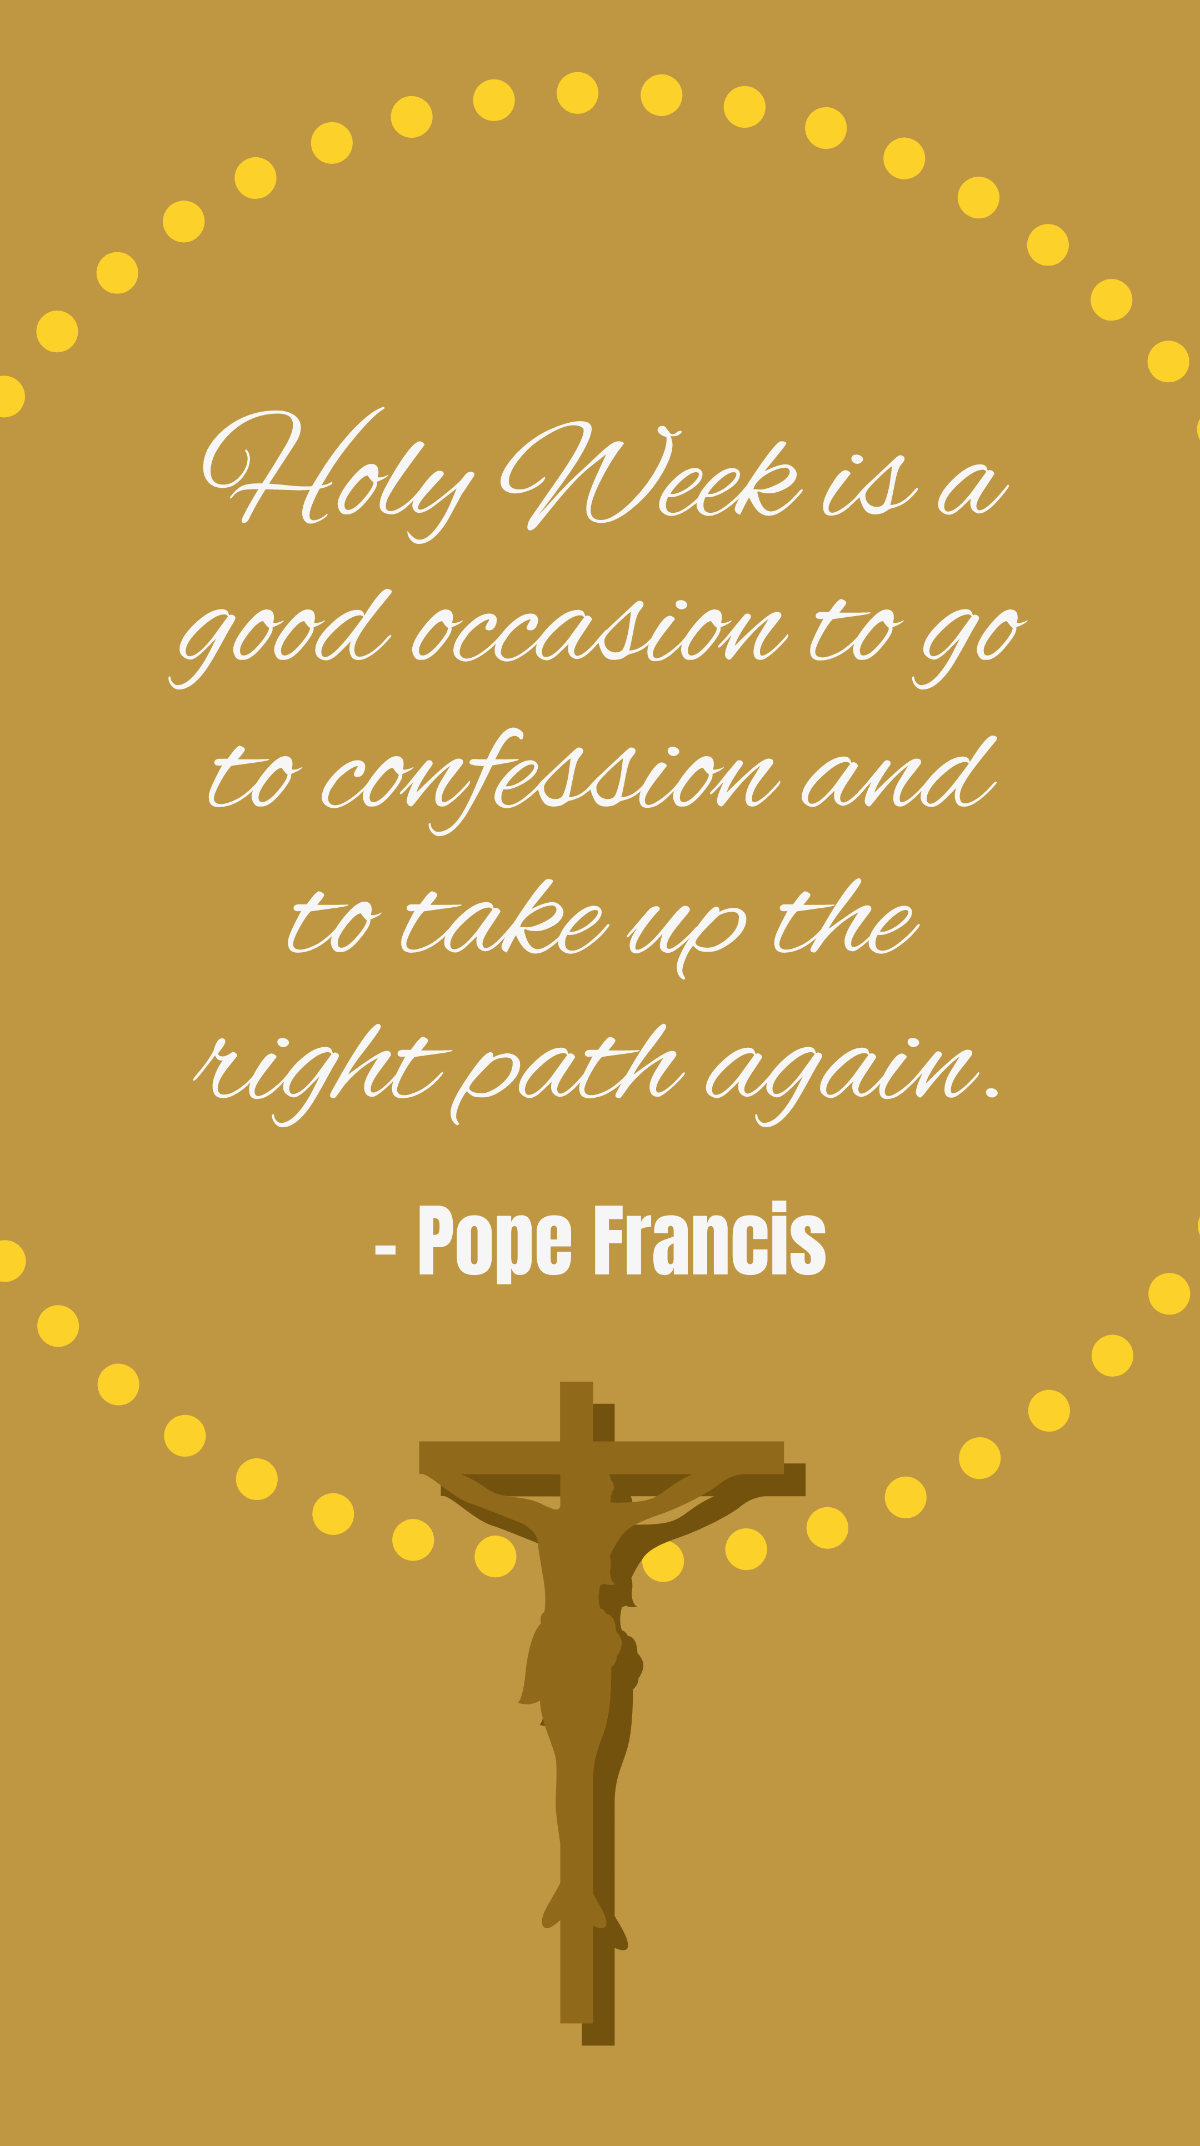 Pope Francis - Holy Week is a good occasion to go to confession and to take up the right path again. Template